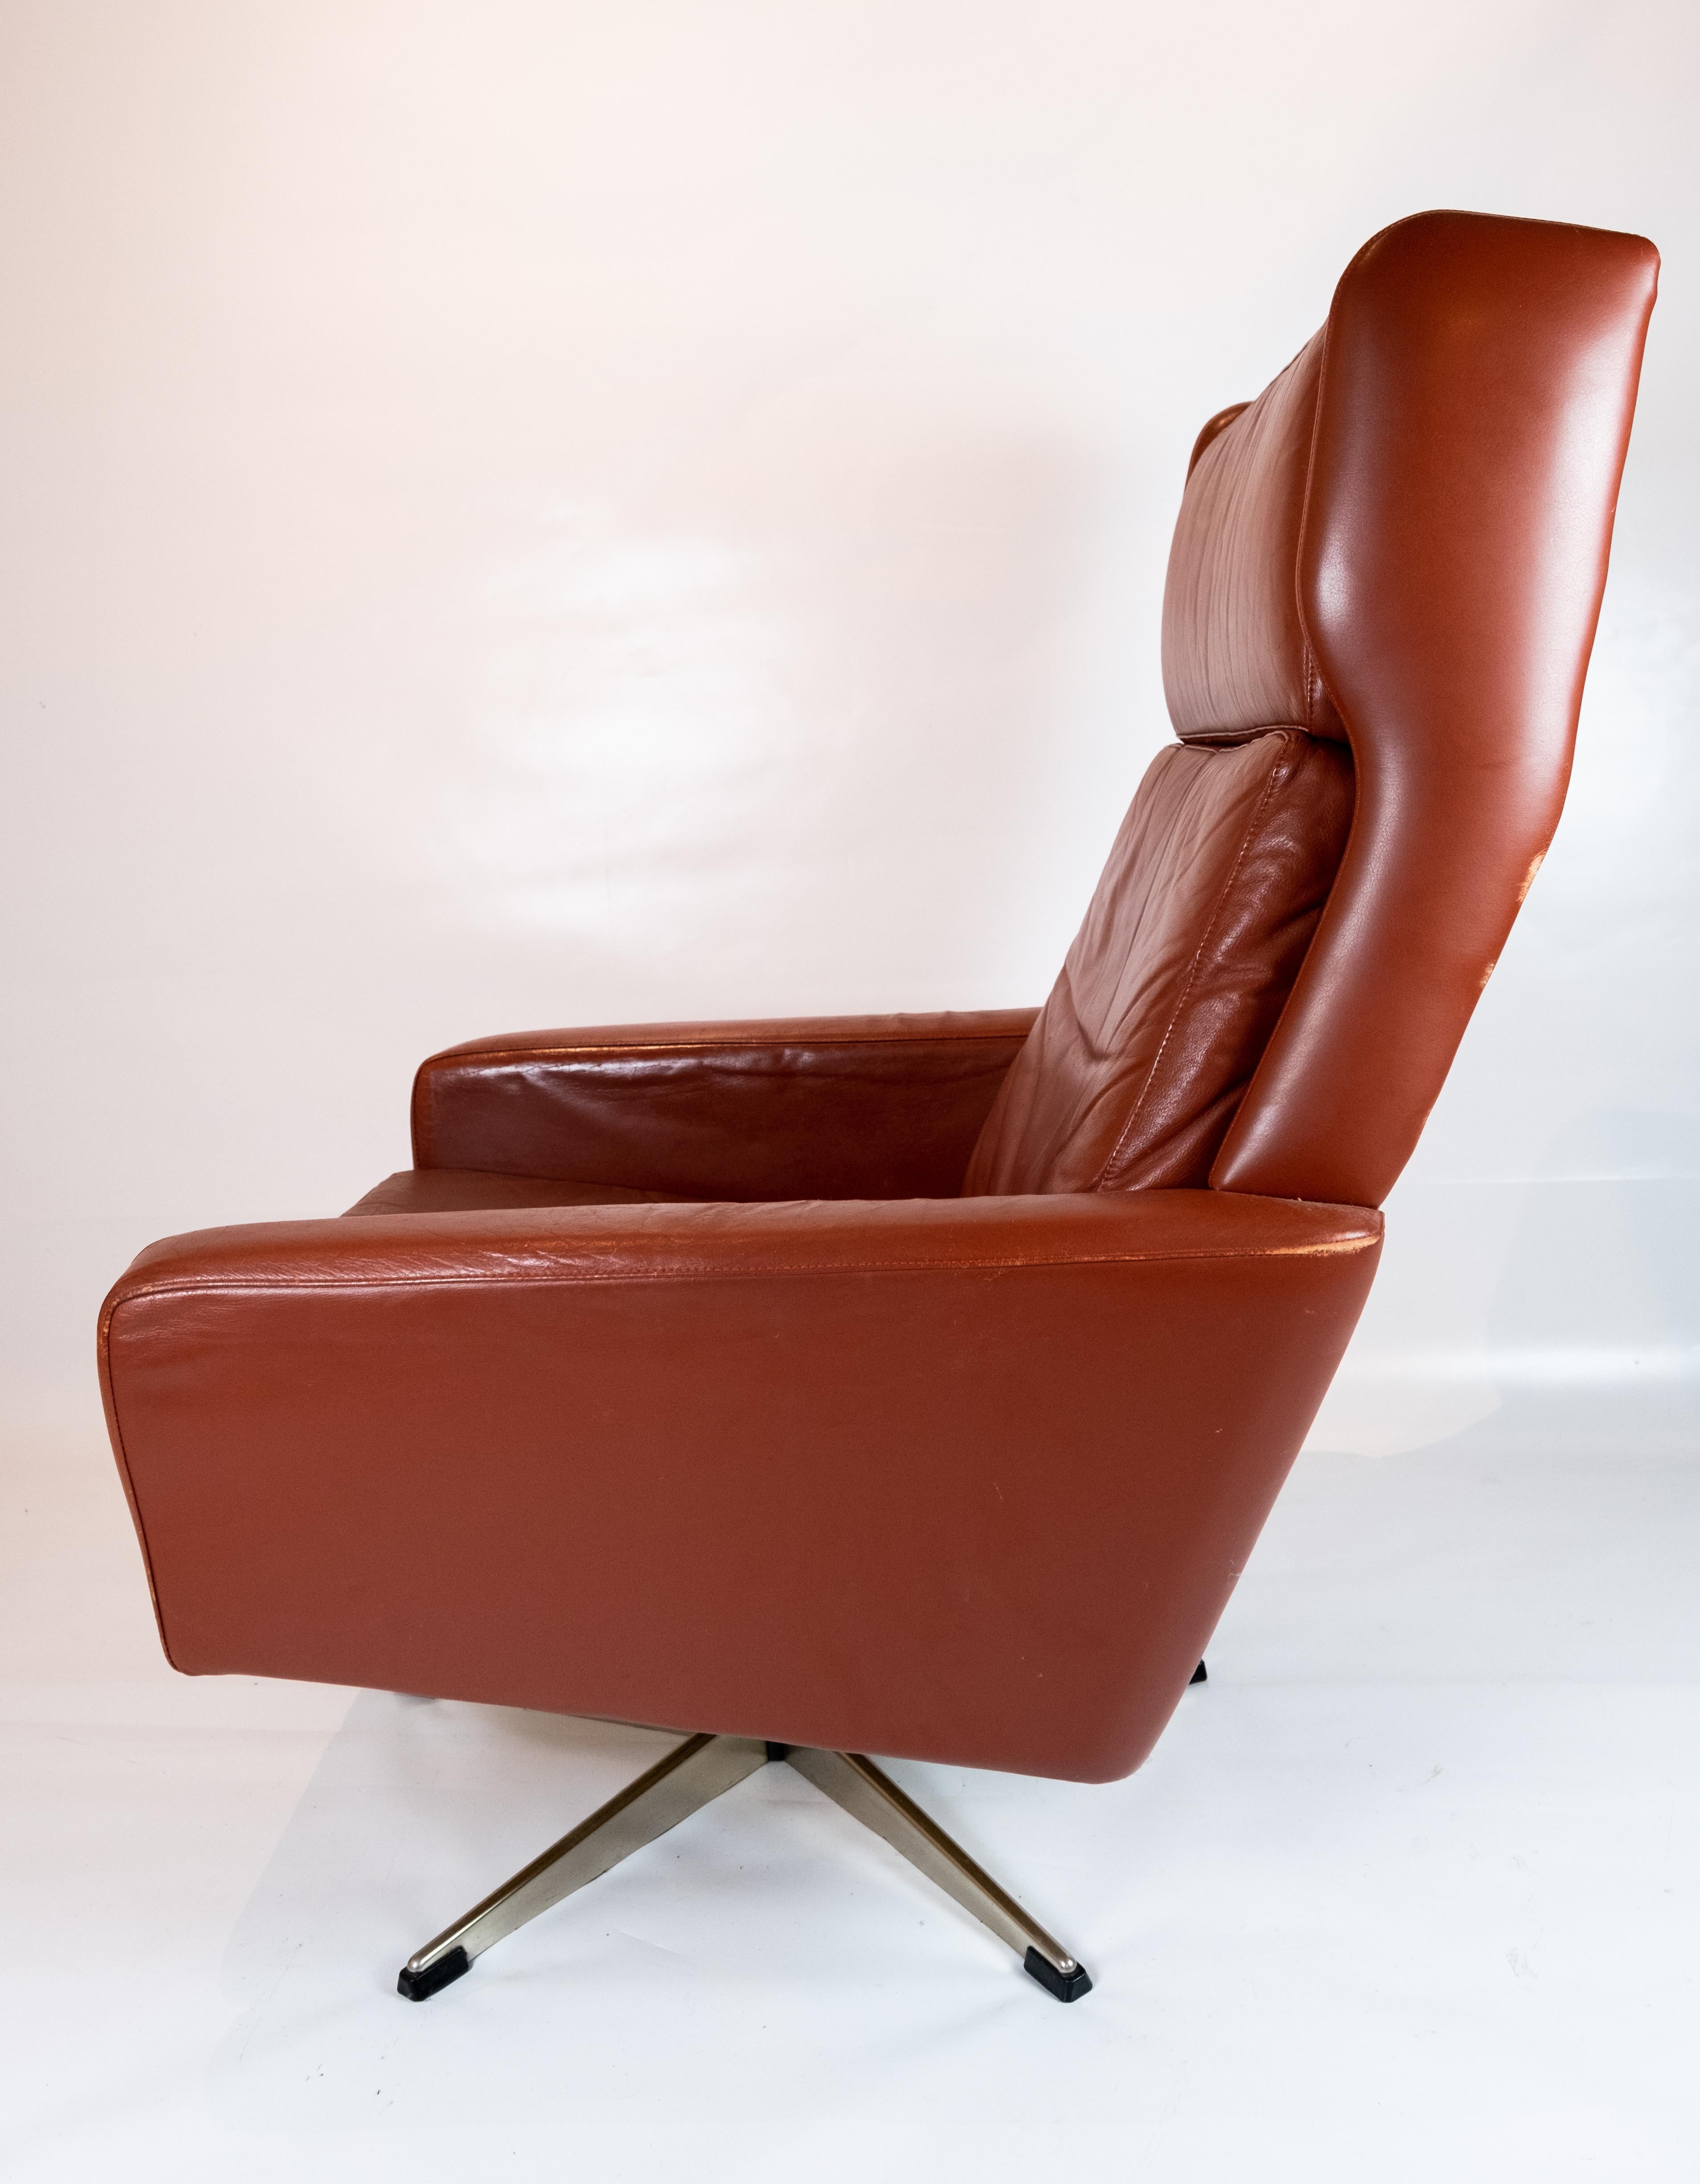 Easy Chair Upholstered with Red Brown Elegance Leather of Danish Design, 1960s For Sale 1